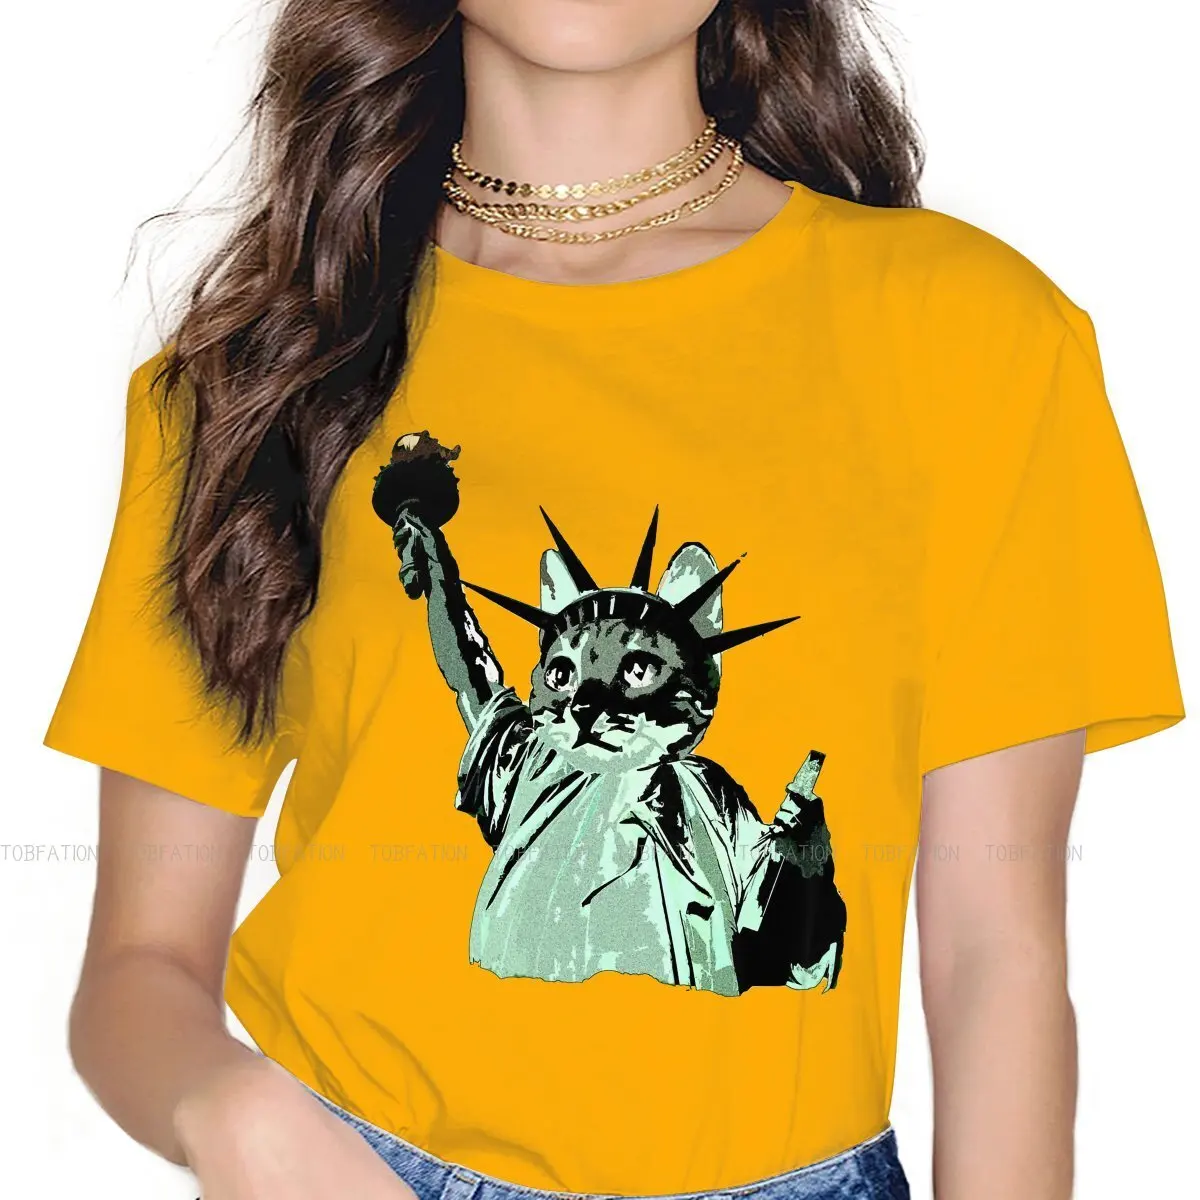 

The Cat Newest TShirts Statue of Liberty Cultural Architecture Woman Graphic Fabric Tops T Shirt O Neck 4XL